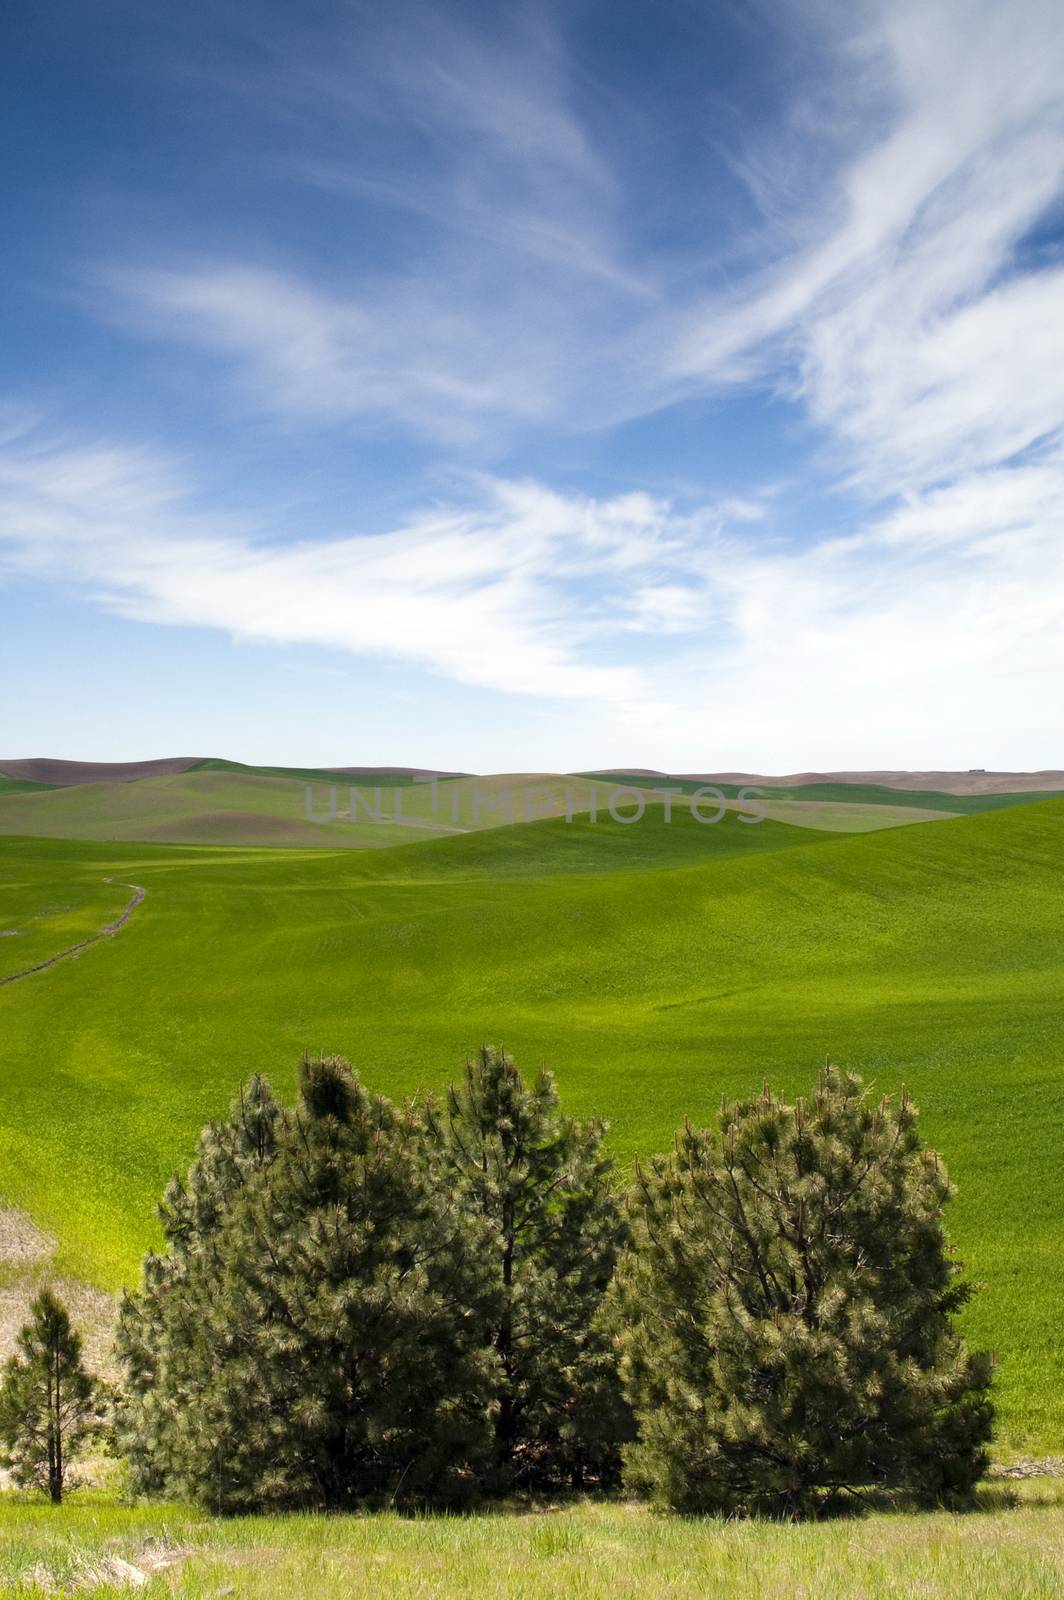 A beautiful day in the Palouse countryside the great northwest United States